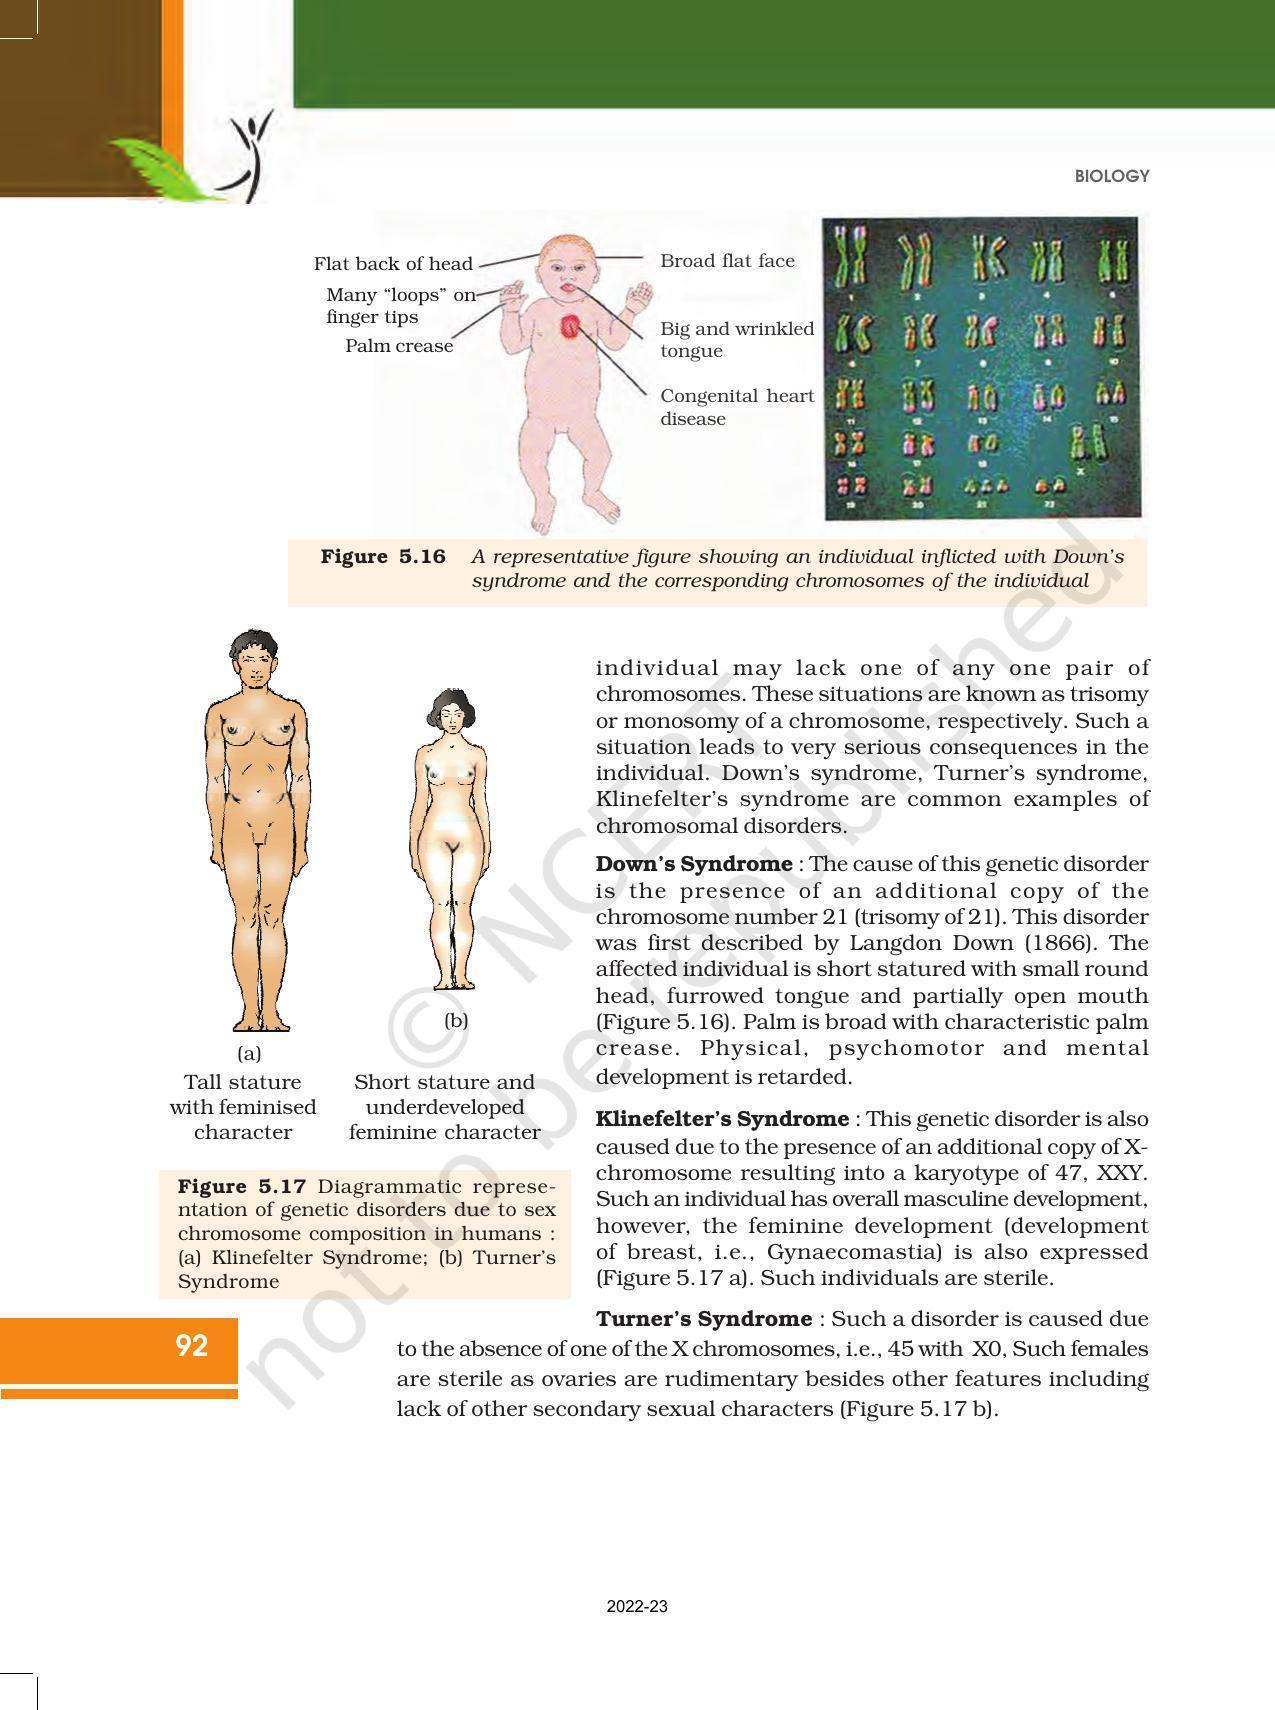 NCERT Book for Class 12 Biology Chapter 5 Principles of Inheritance and Variation - Page 26